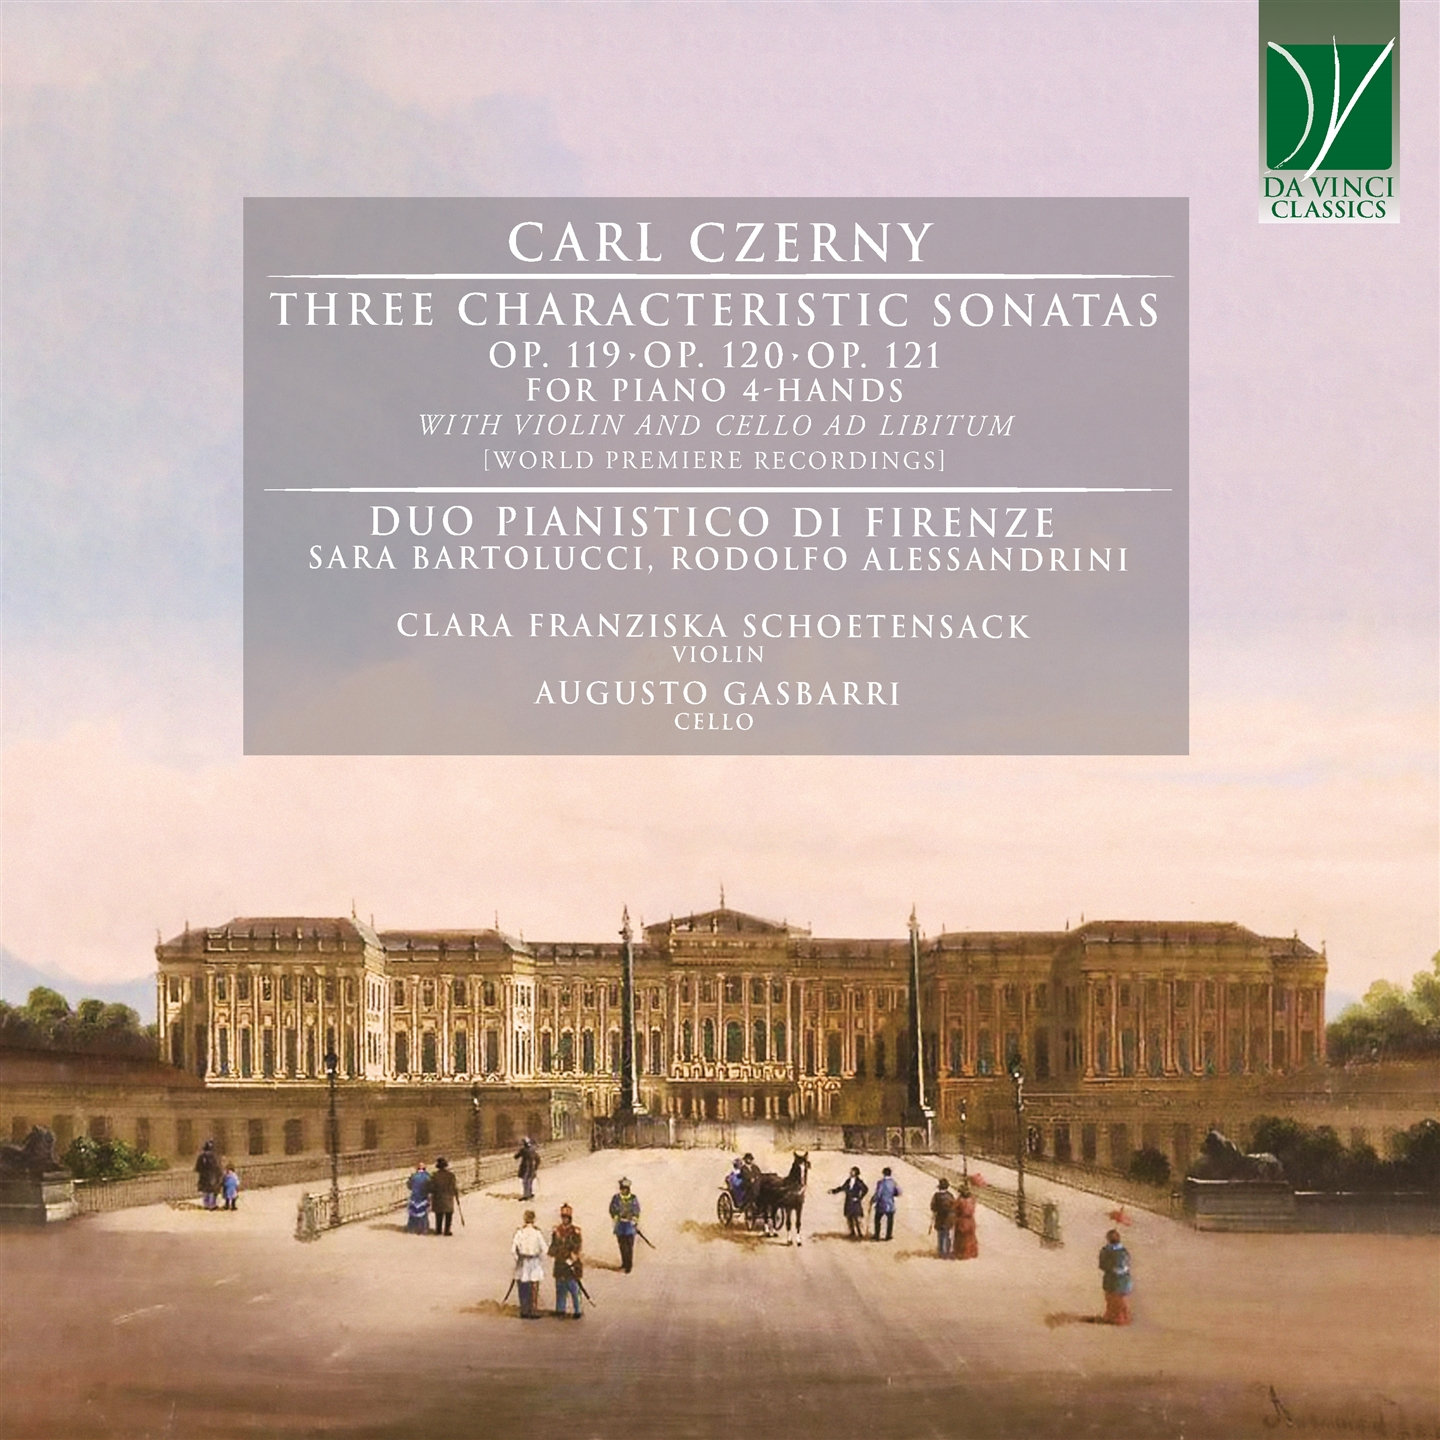 CZERNY: THREE CHARACTERISTIC SONATAS FOR PIANO 4-HANDS WITH VIOLIN AND CELLO AD